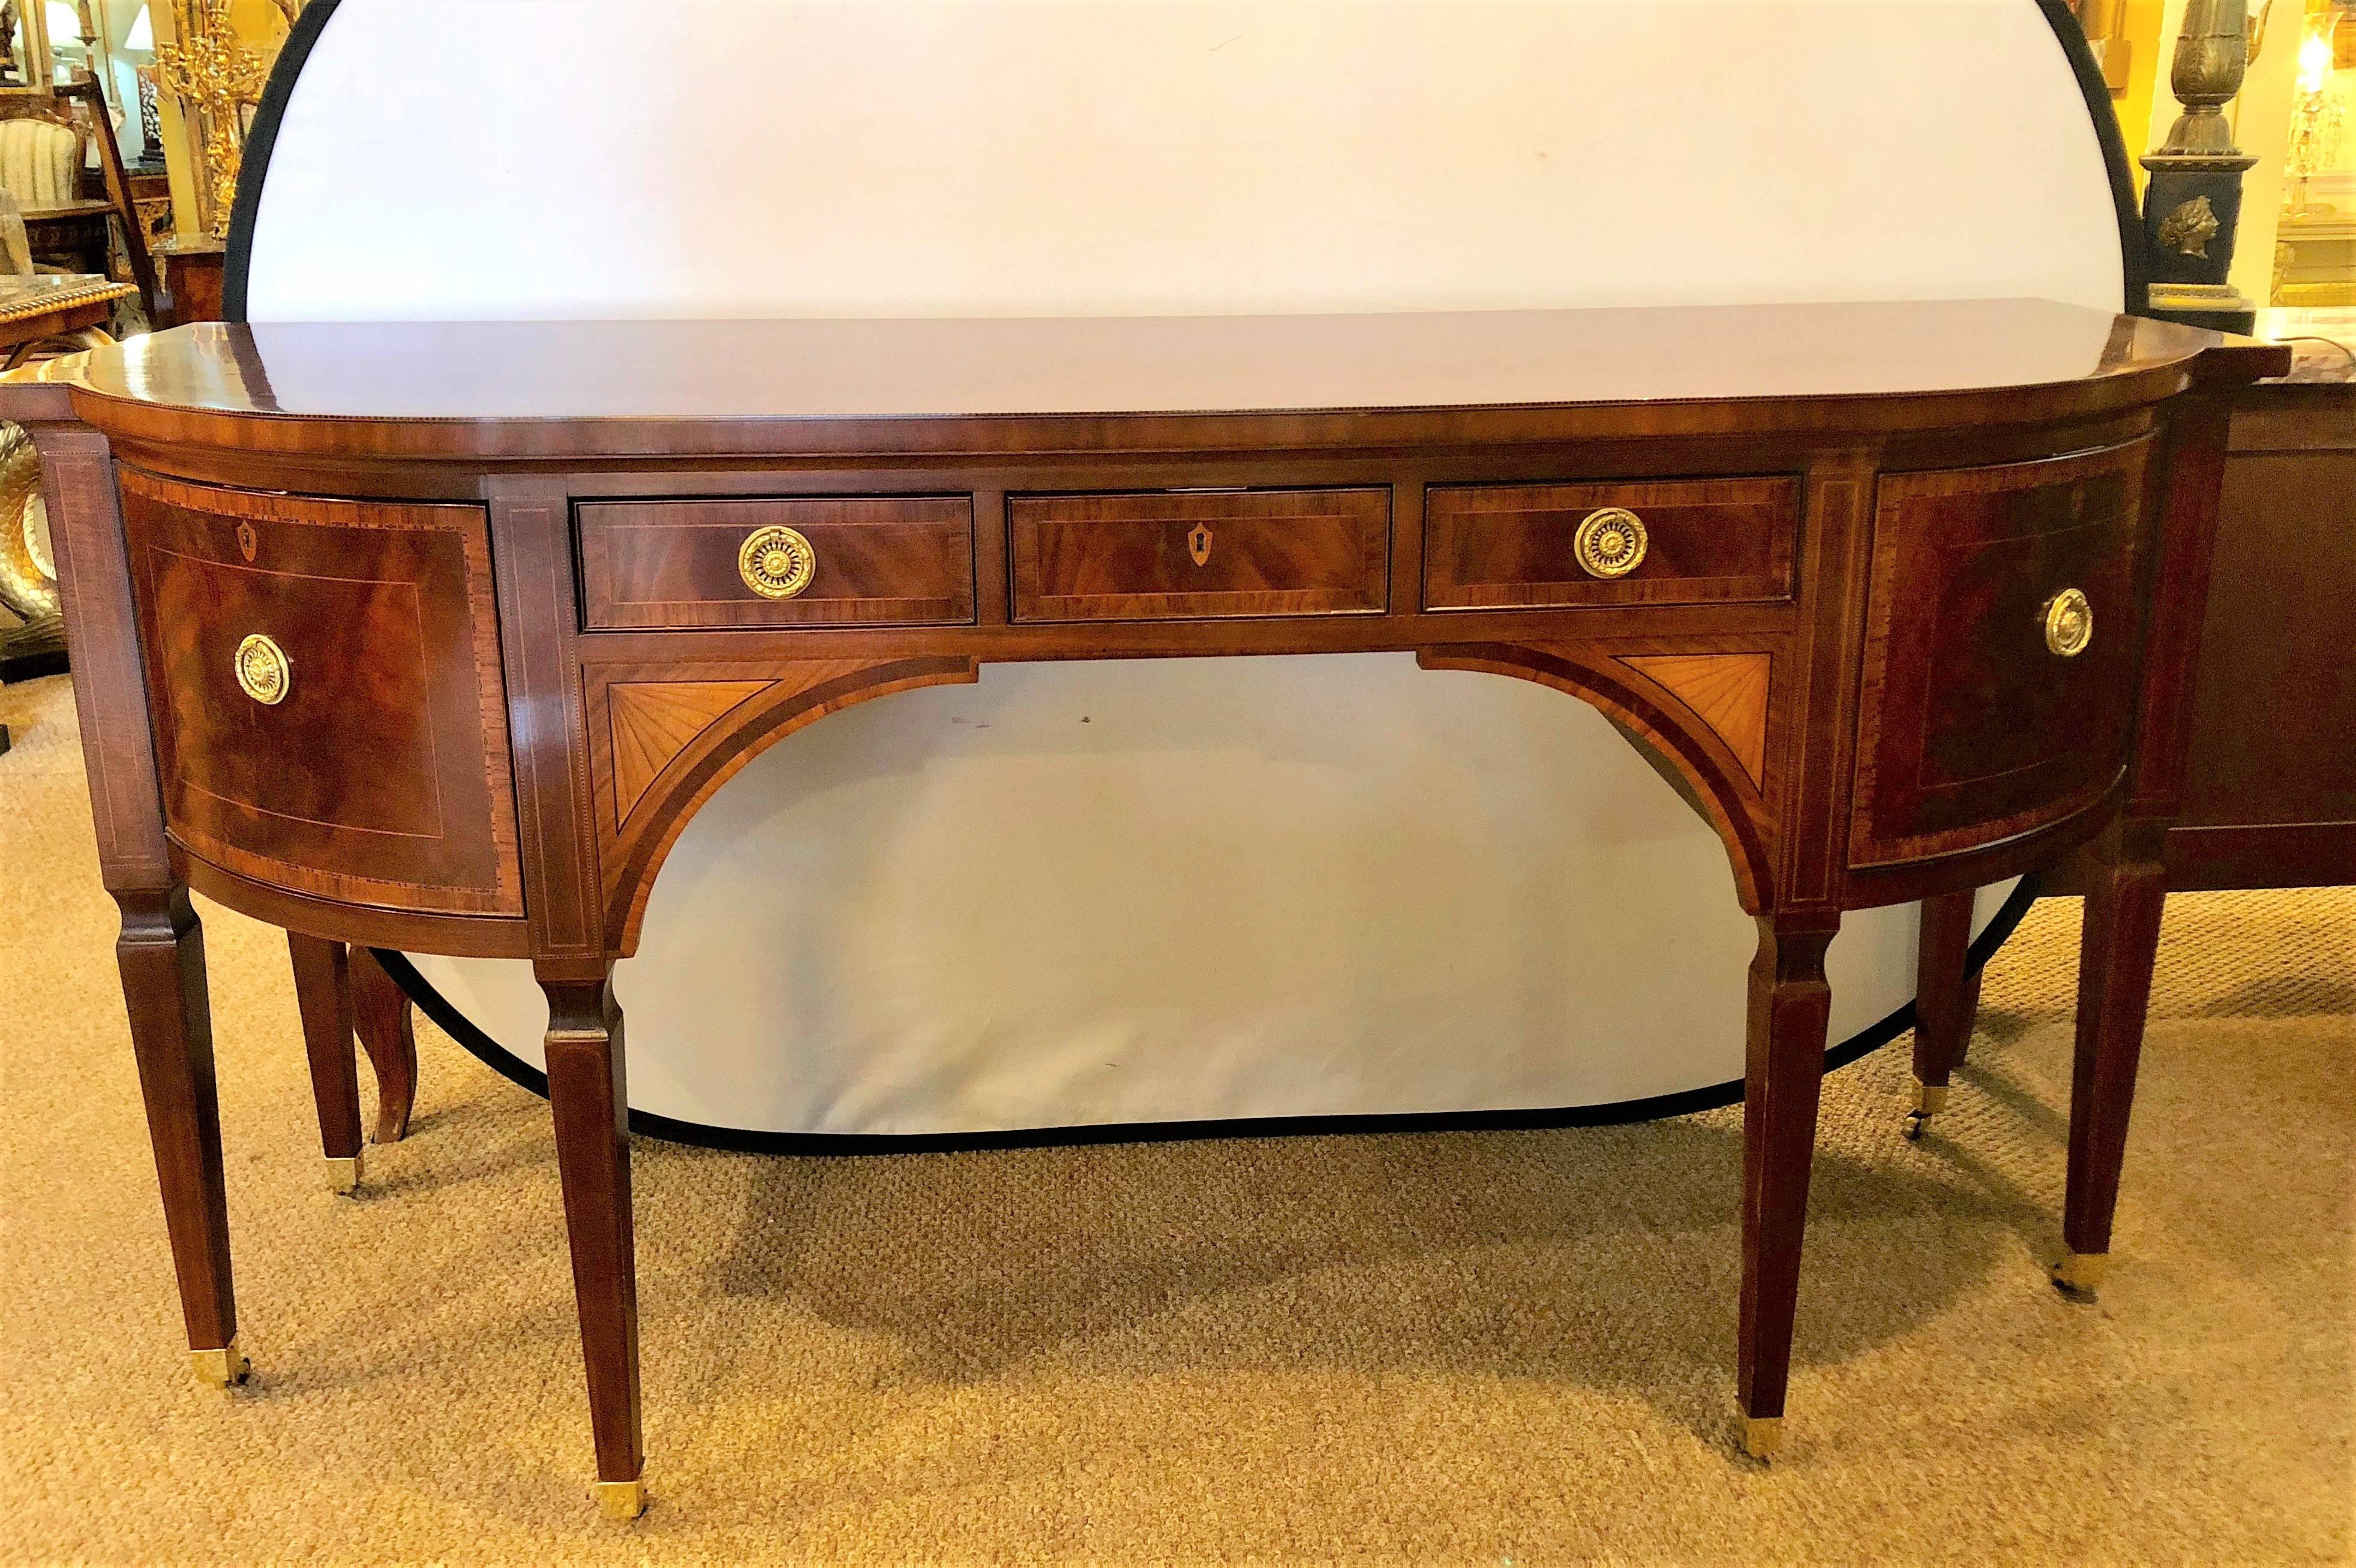 A Baker Federal style fine satinwood inlaid sideboard. This wonderful Baker Furniture Company sideboard or server sits on brass casters leading to fine tapering legs which support an upper case having a center group of three drawers flanked by